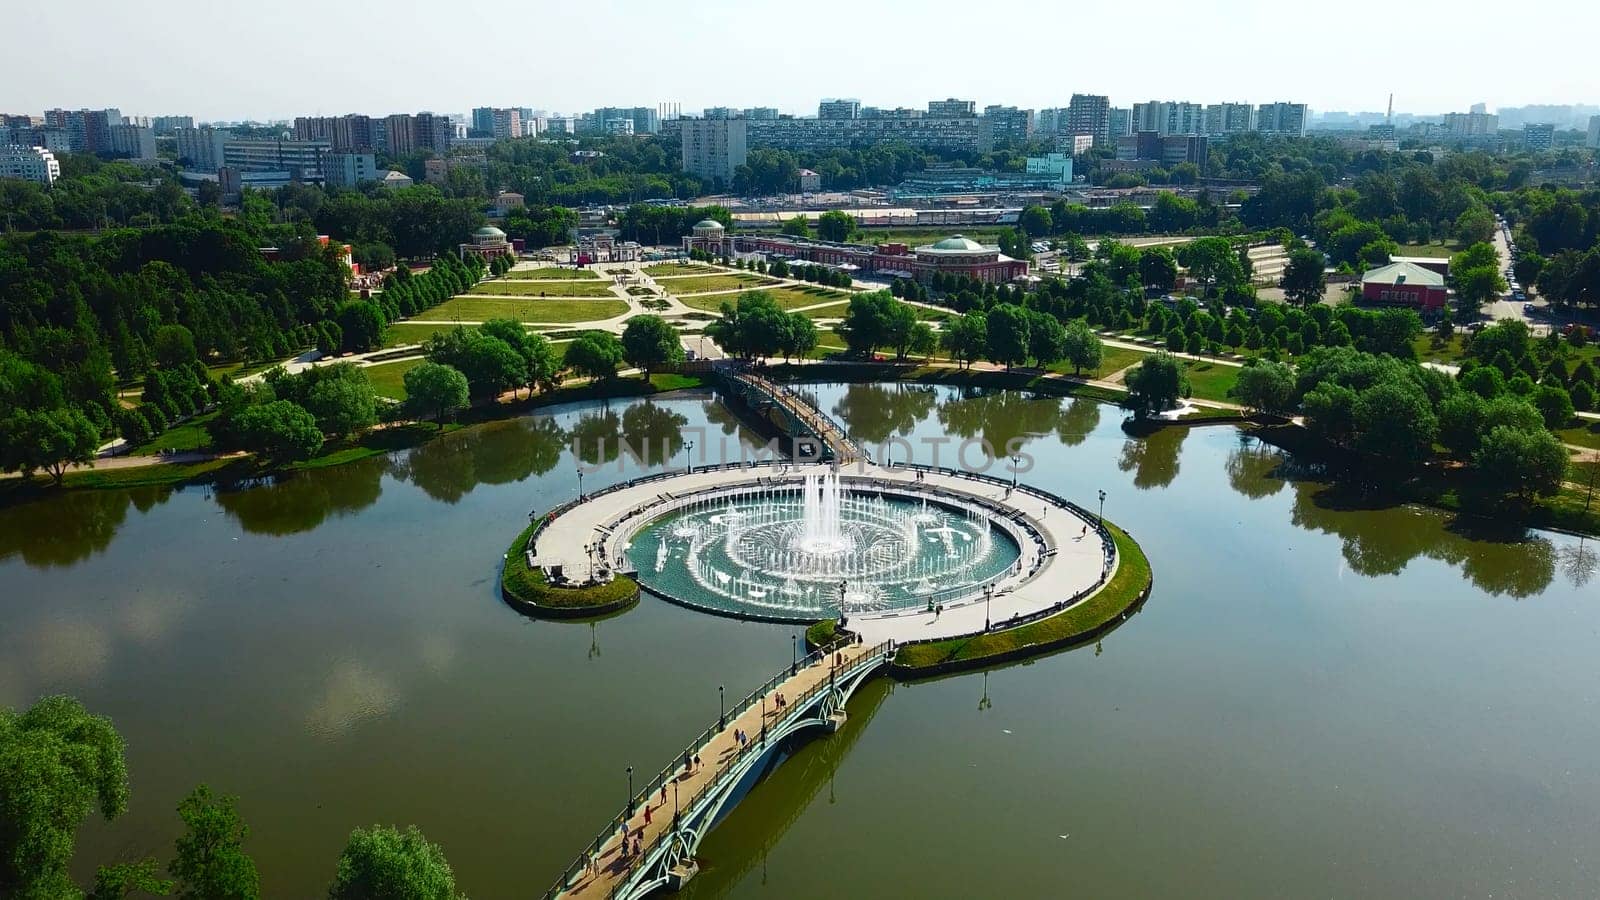 Top view of fountain in pond and historical palace. Creative. Amazing fountain in lake with pedestrian bridges at historical palace. Historical complex with fountains, gardens and buildings.